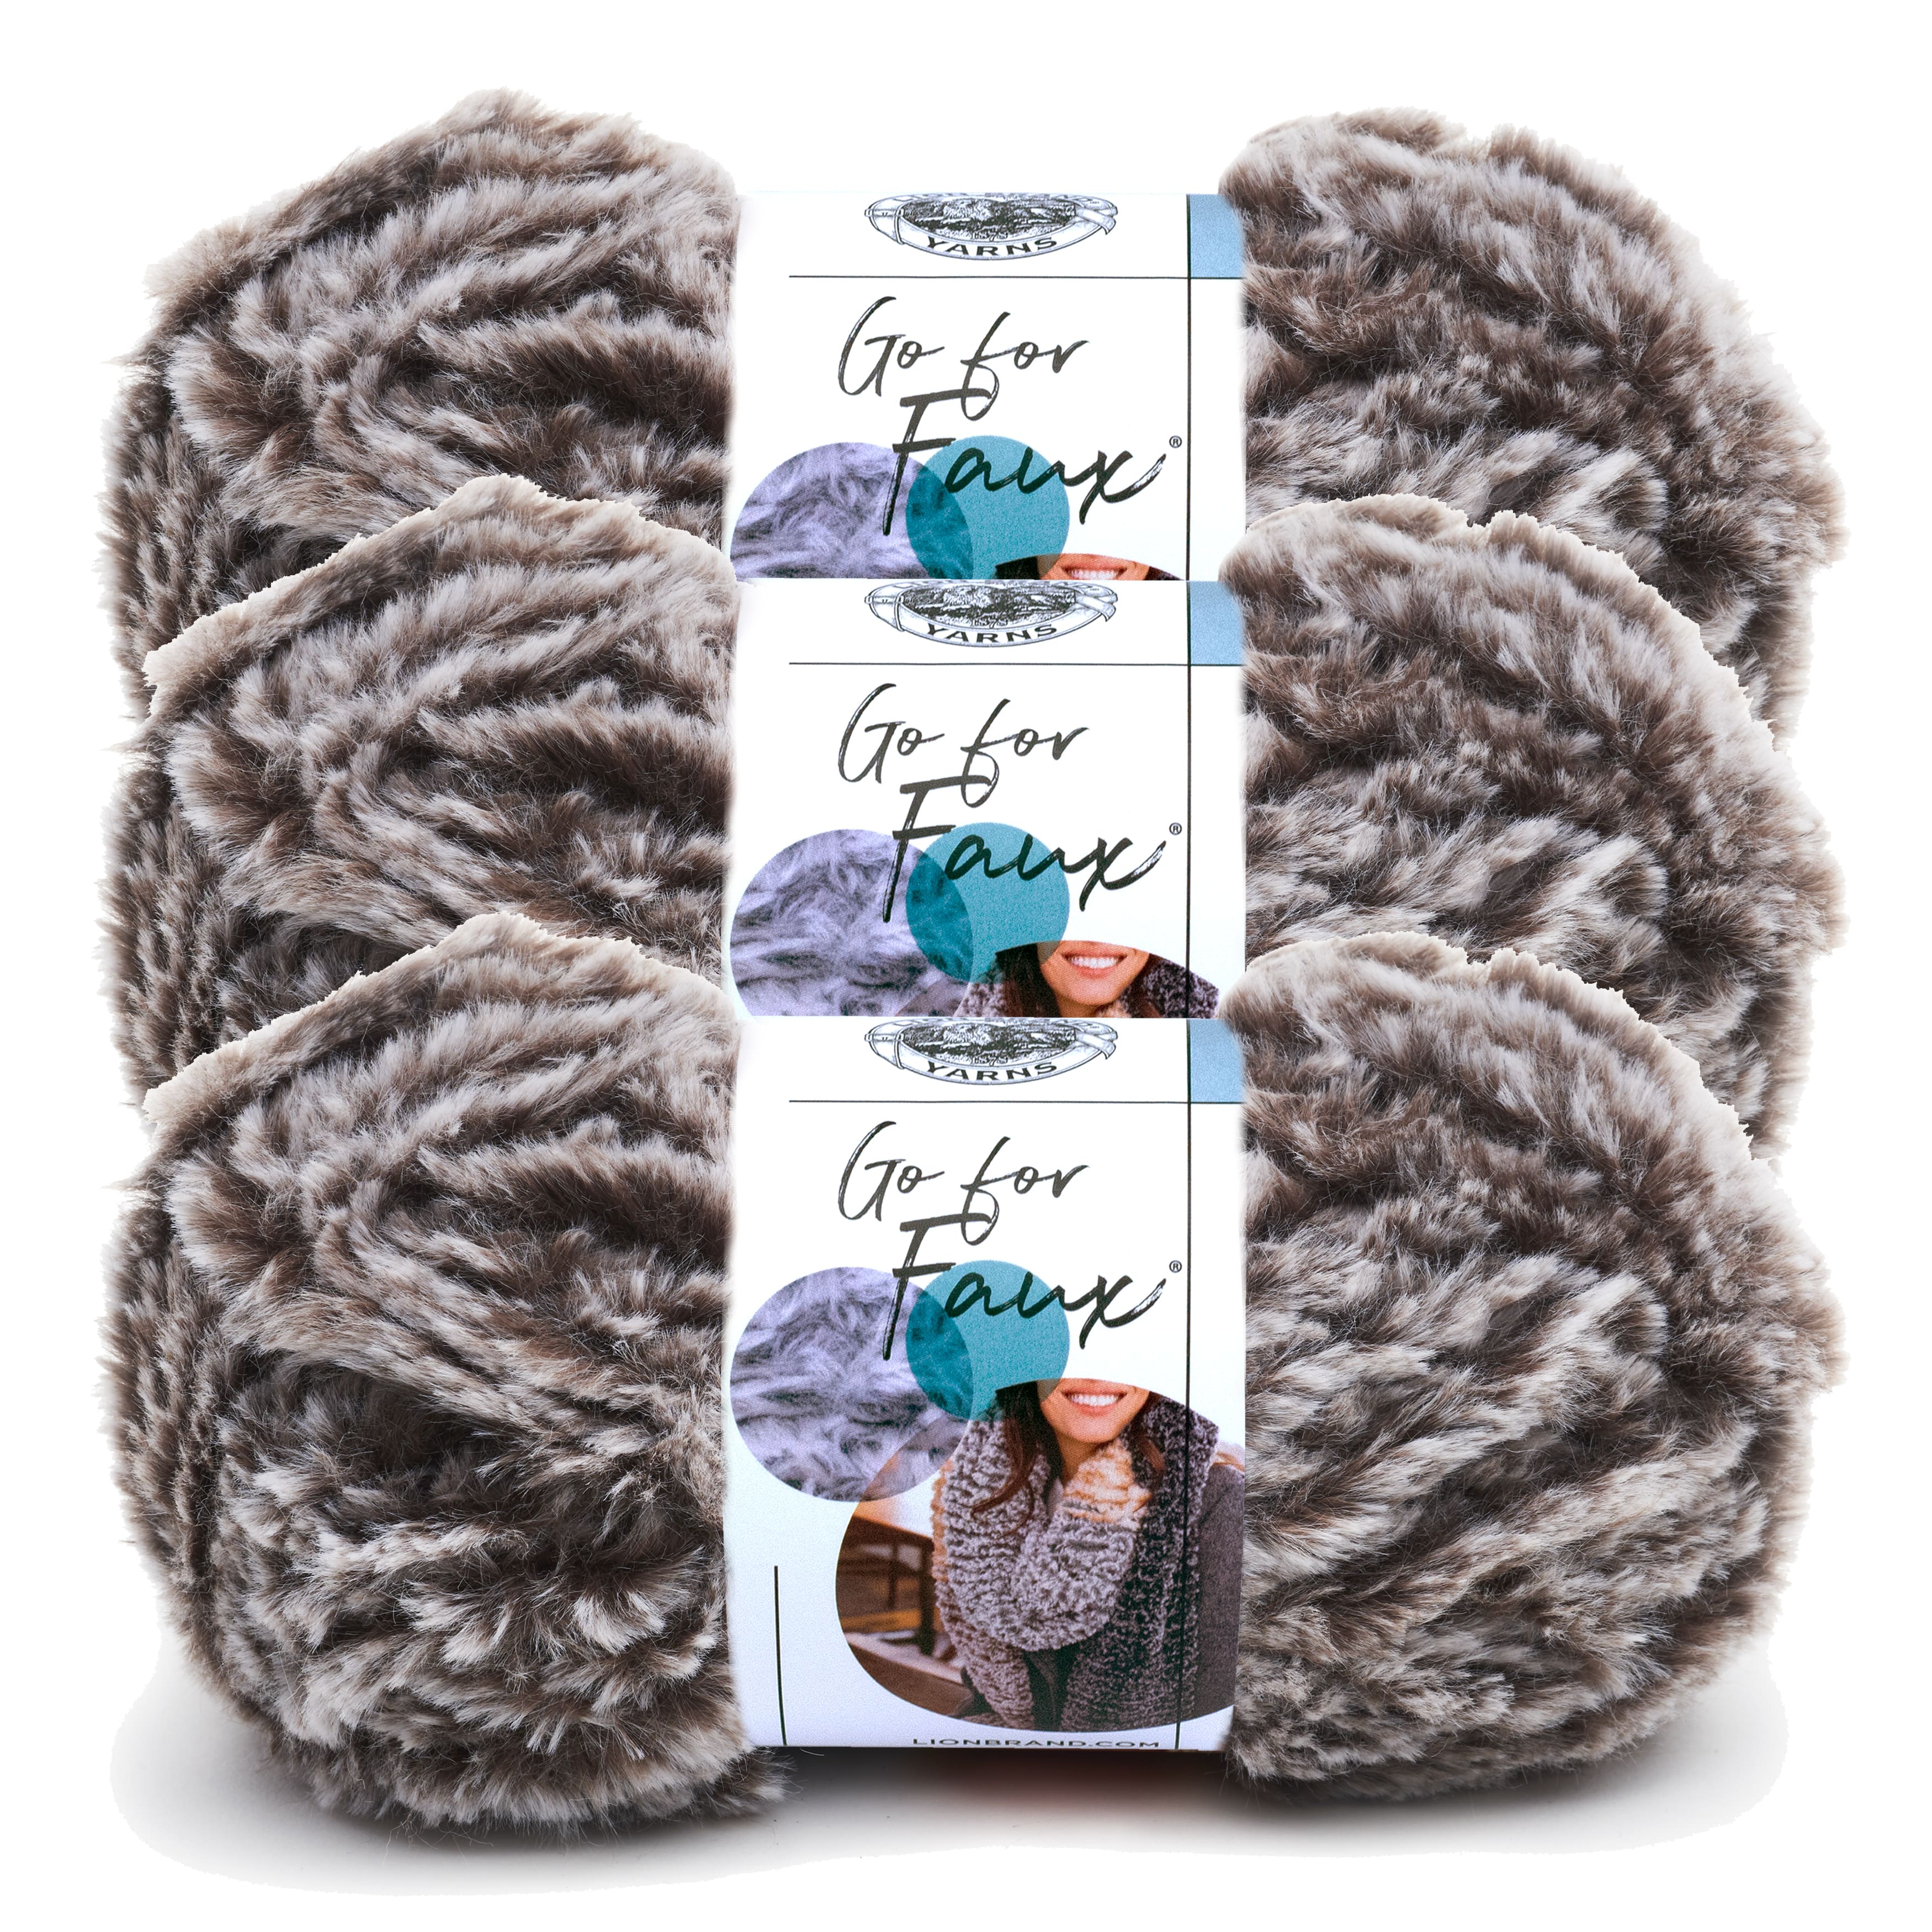 Lion Brand Go For Faux Thick & Quick Yarn-Baked Alaska, 1 count